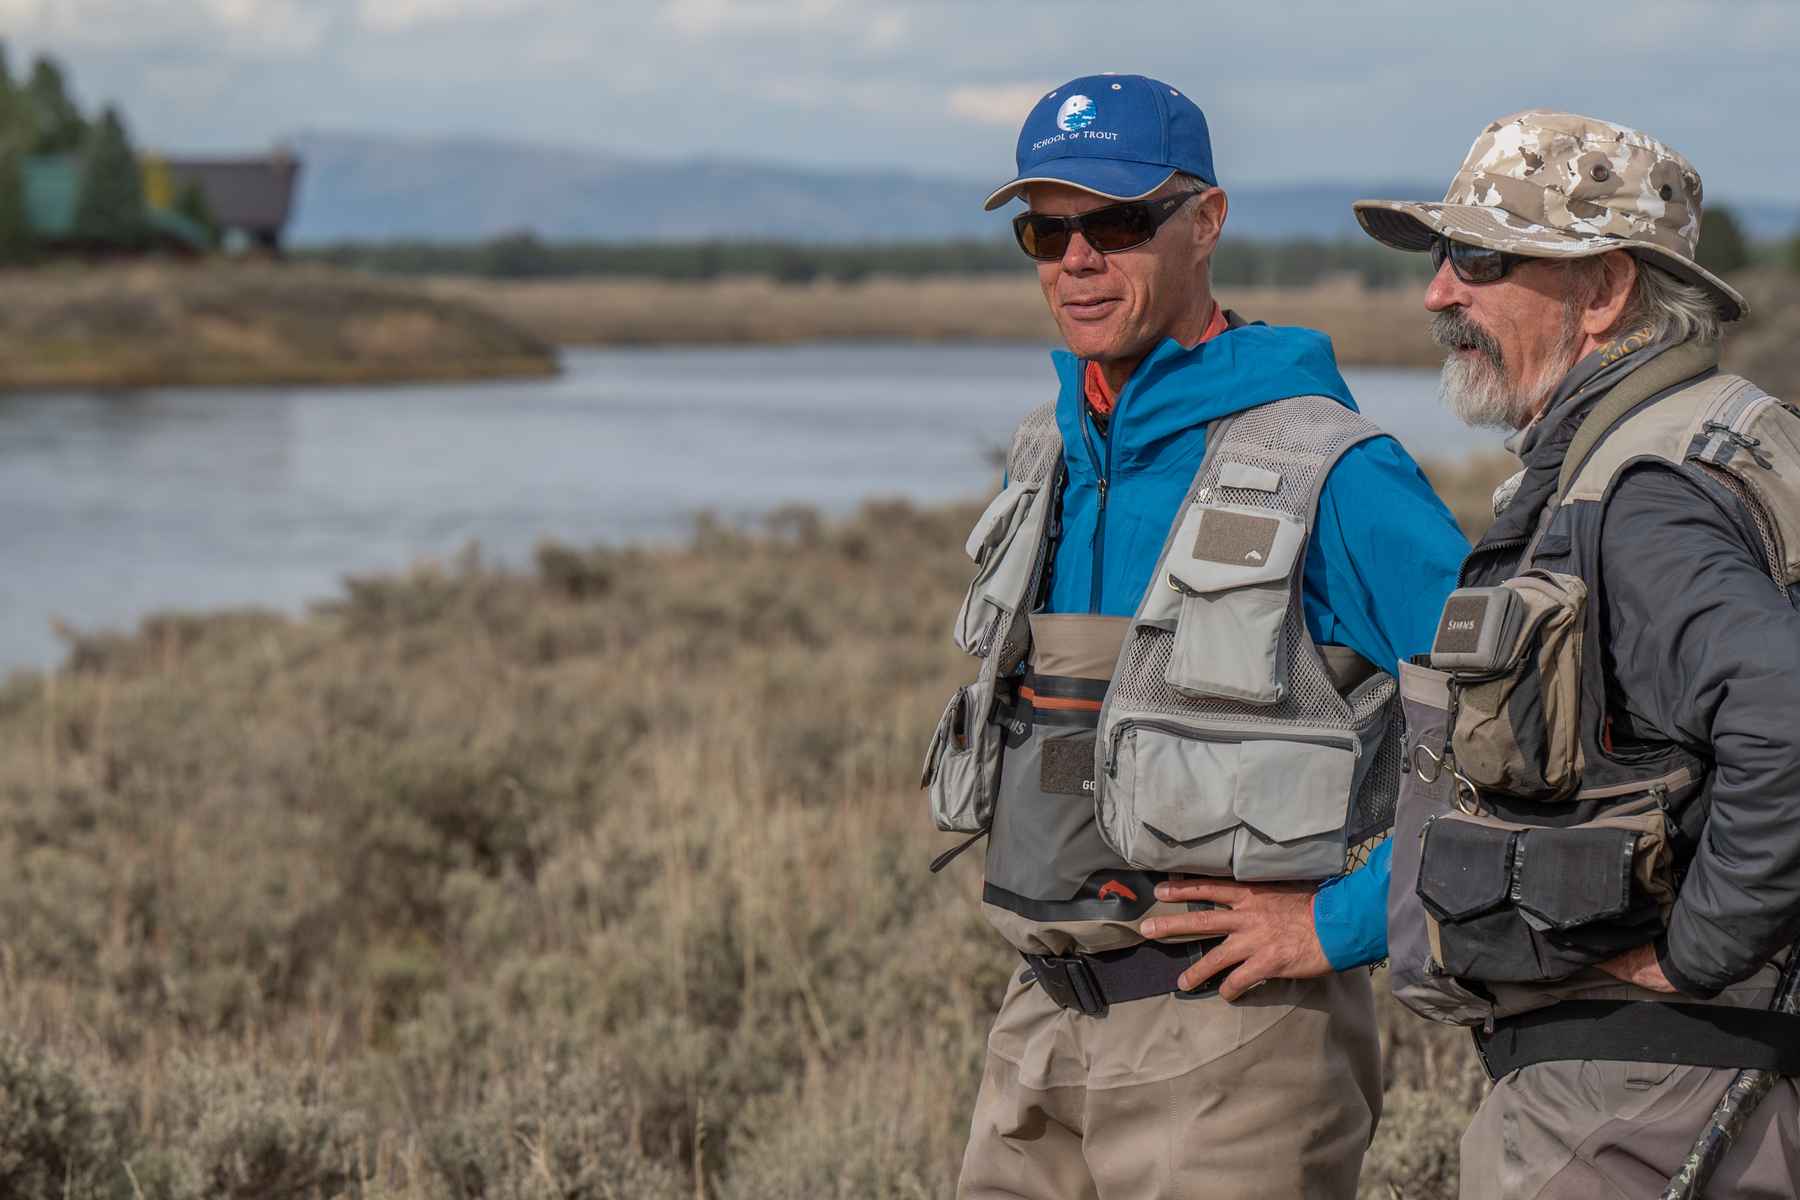 Live Q&A: Becoming a well-rounded fly angler